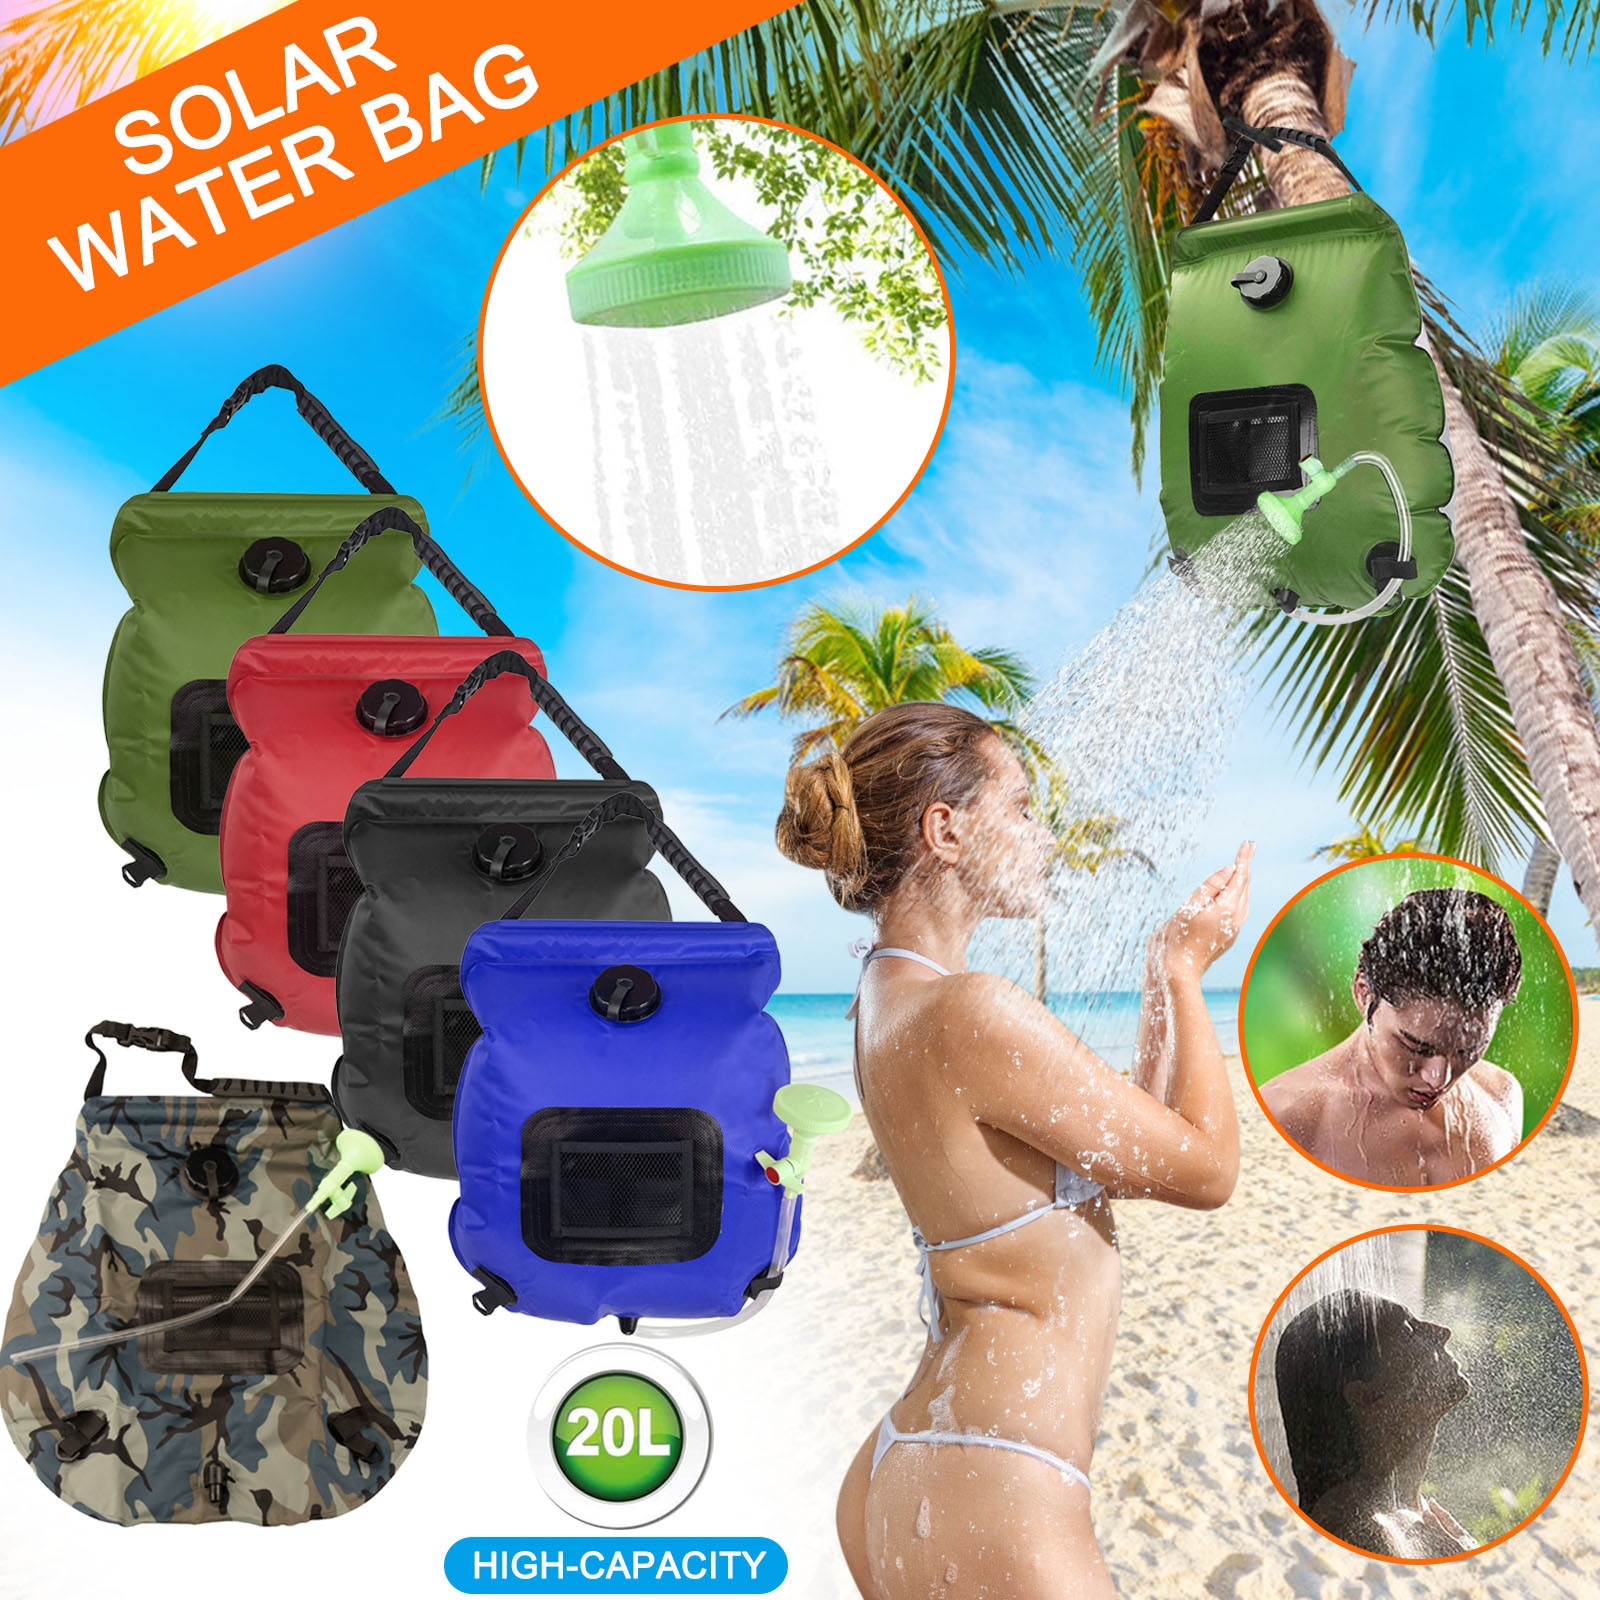 20L Portable Solar Thermal Water Bags Outdoor Camping Shower Bag Solar Heating Portable Folding Bathing Shower Head Switchable|Water Bags| - AliExpress